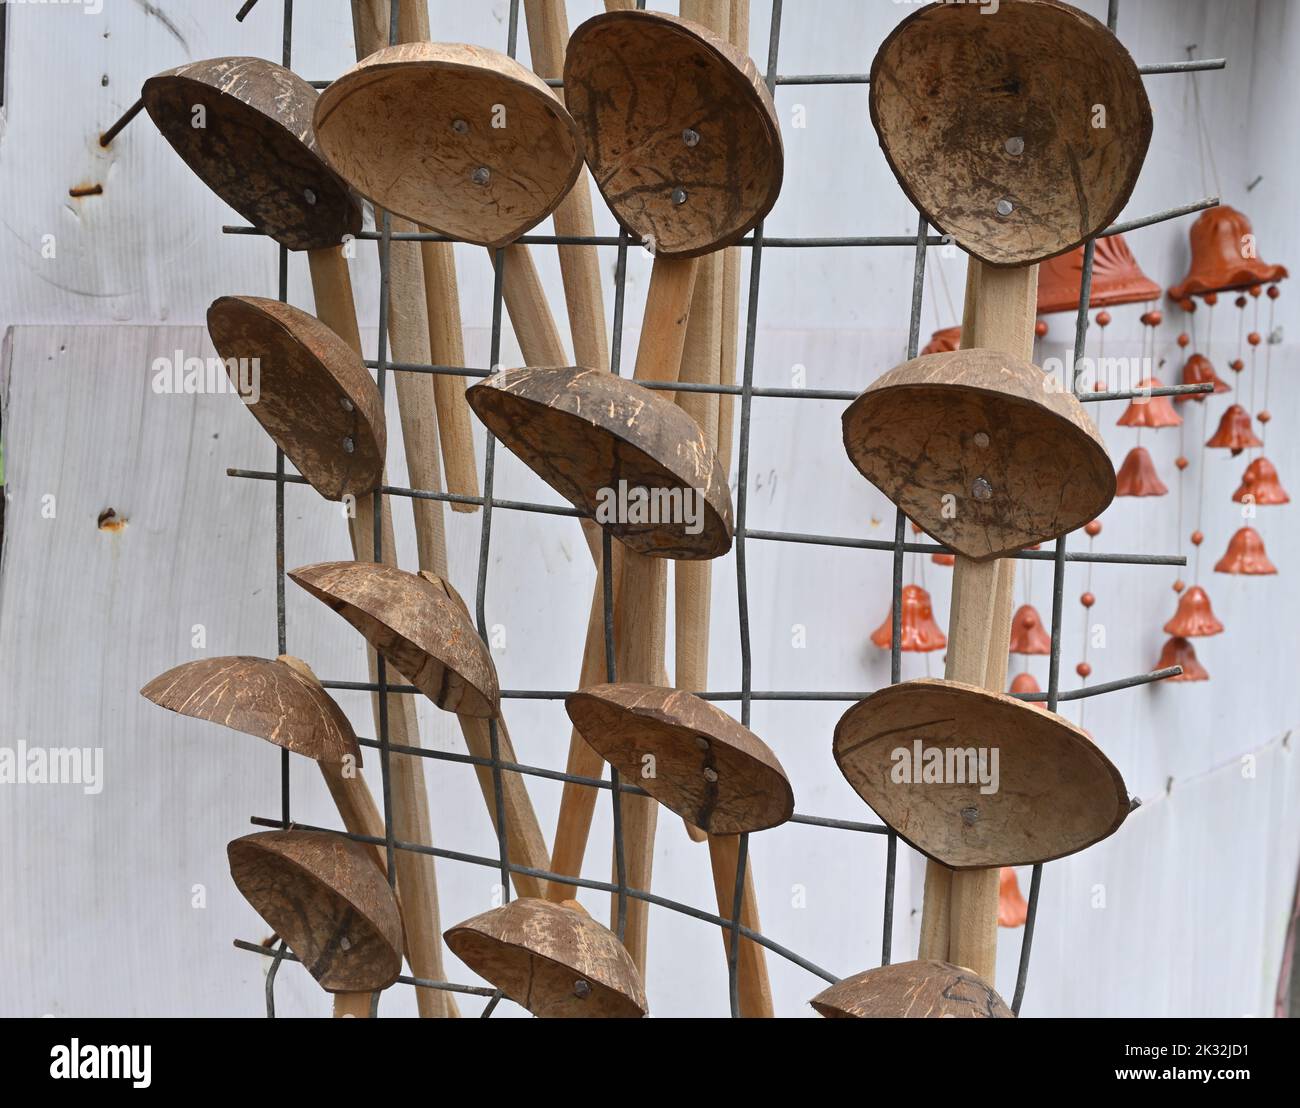 Handmade Coconut shell spoons hang on an iron grid for sell Stock Photo